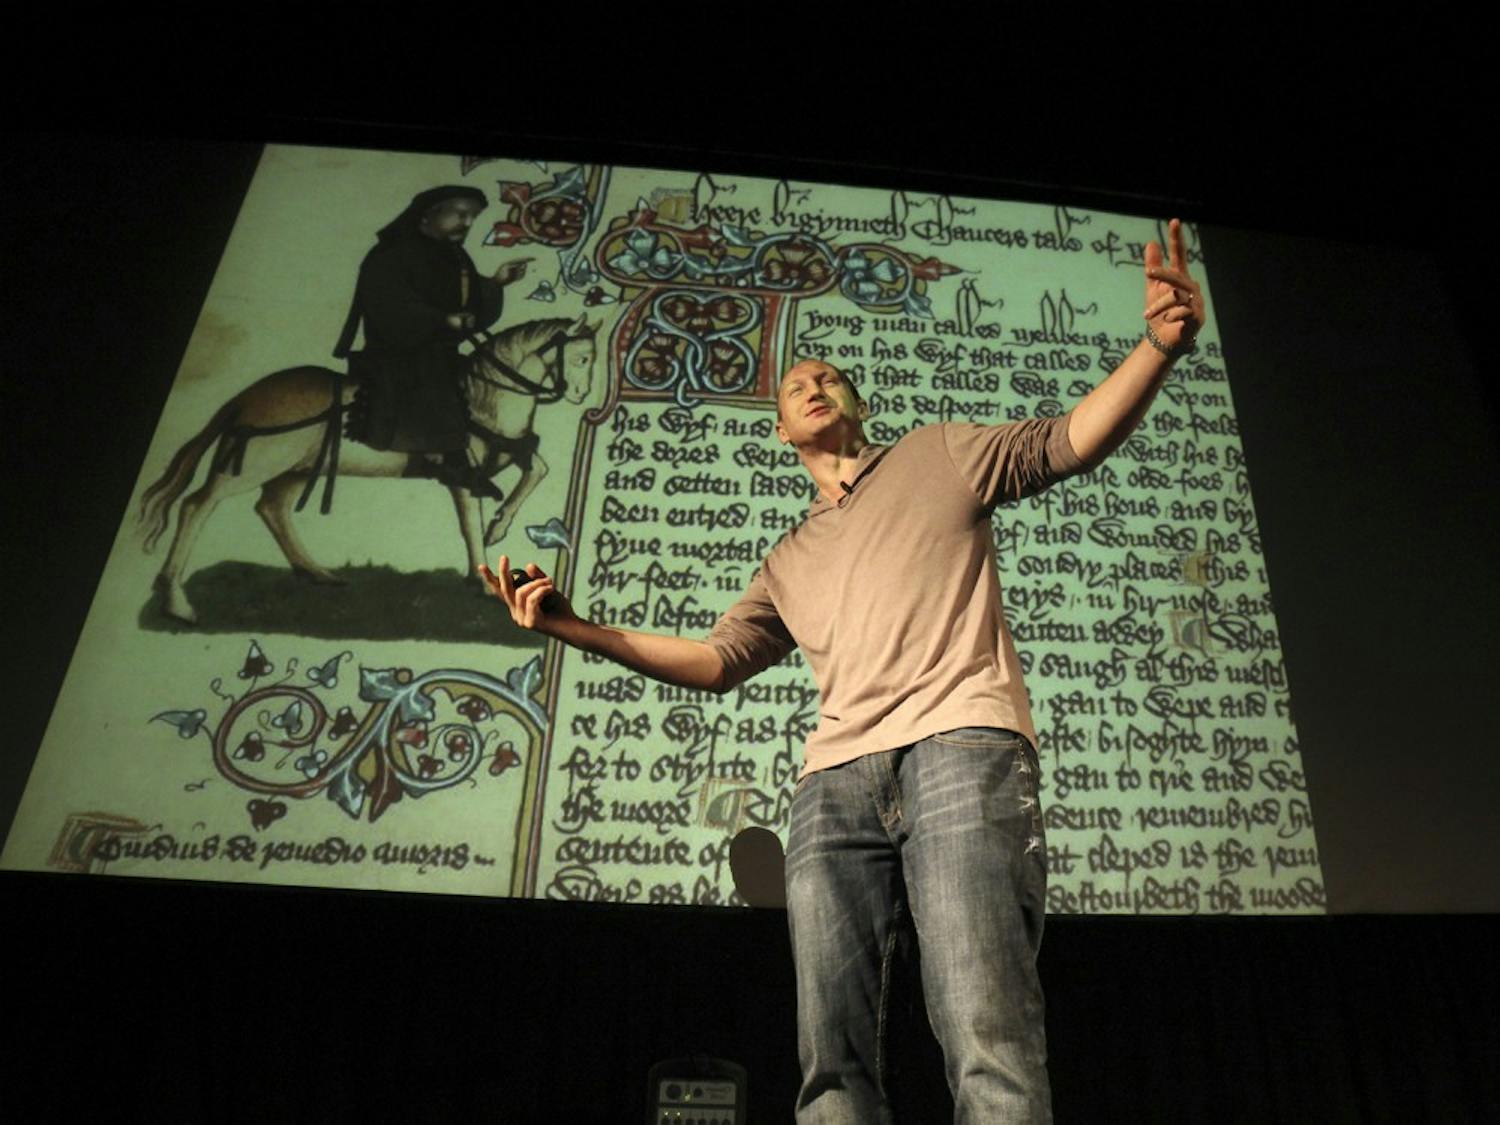 Baba Brinkman re-tells The Canterbury Tales and Beowulf through rapping.